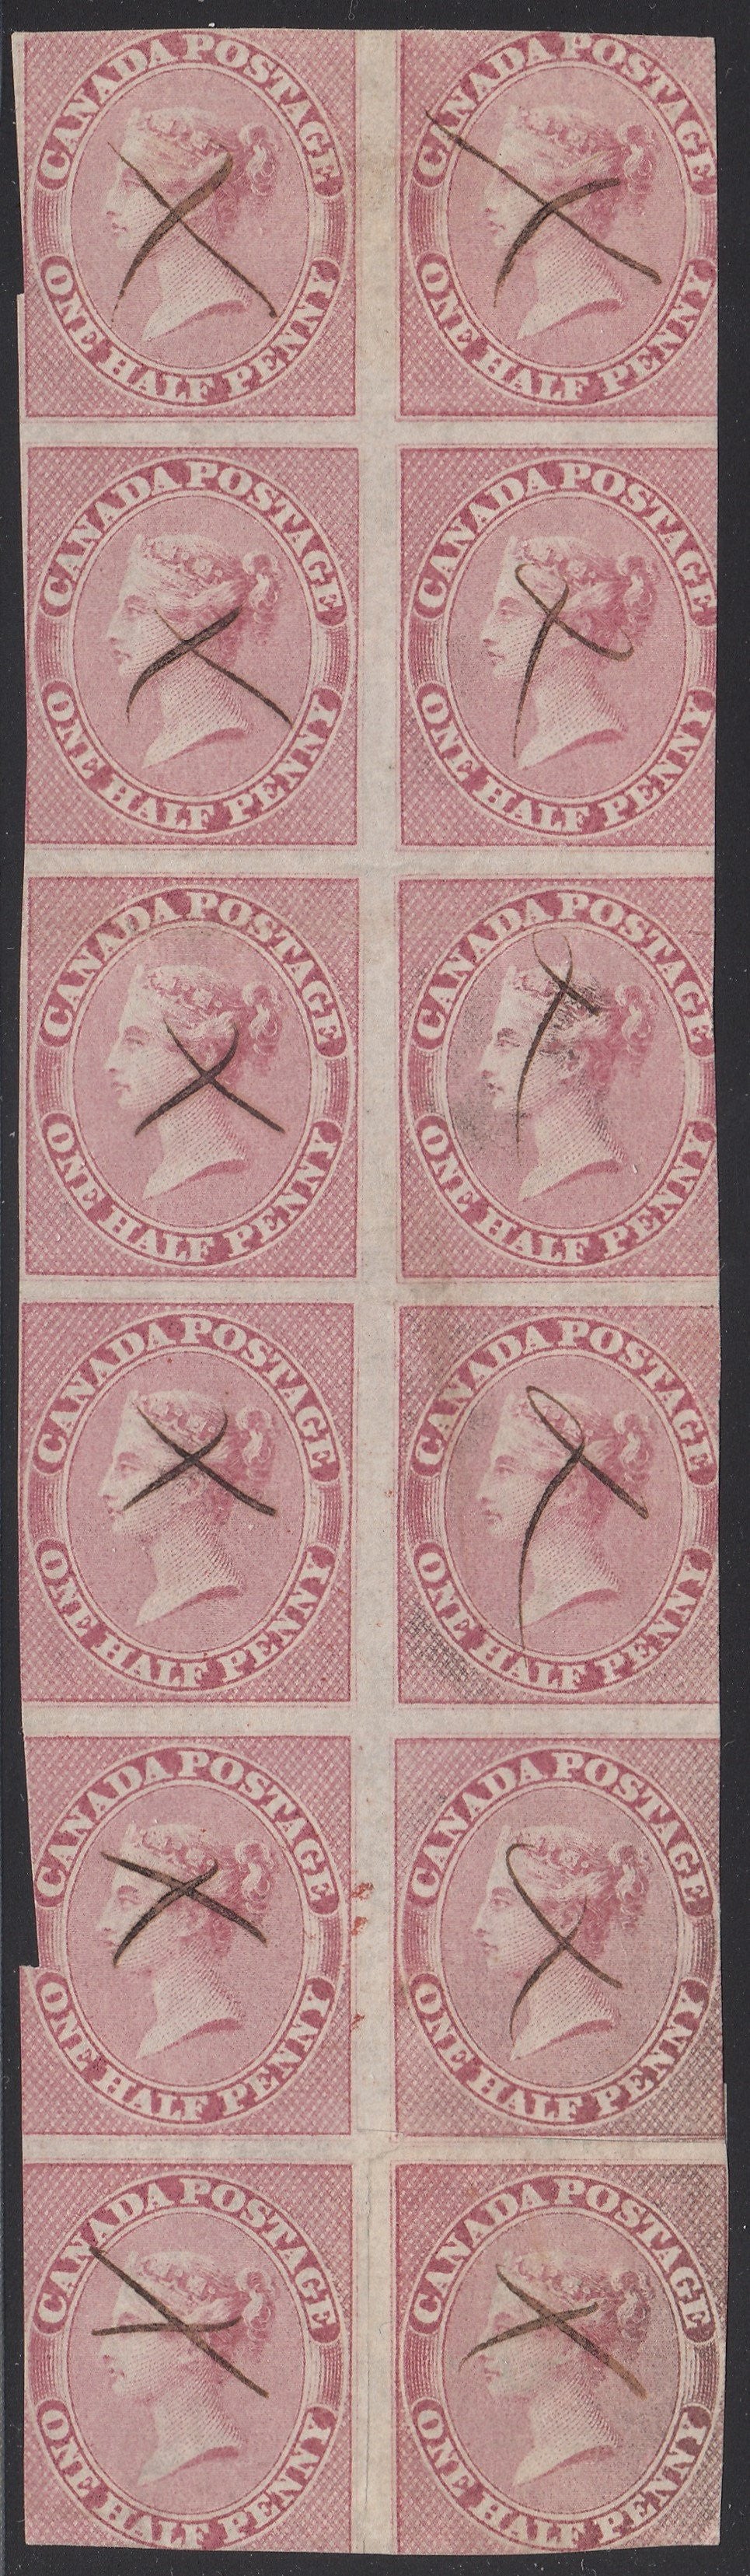 0008CA1708 - Canada #8 - Used Block of 12 - Re-Entries - Deveney Stamps Ltd. Canadian Stamps